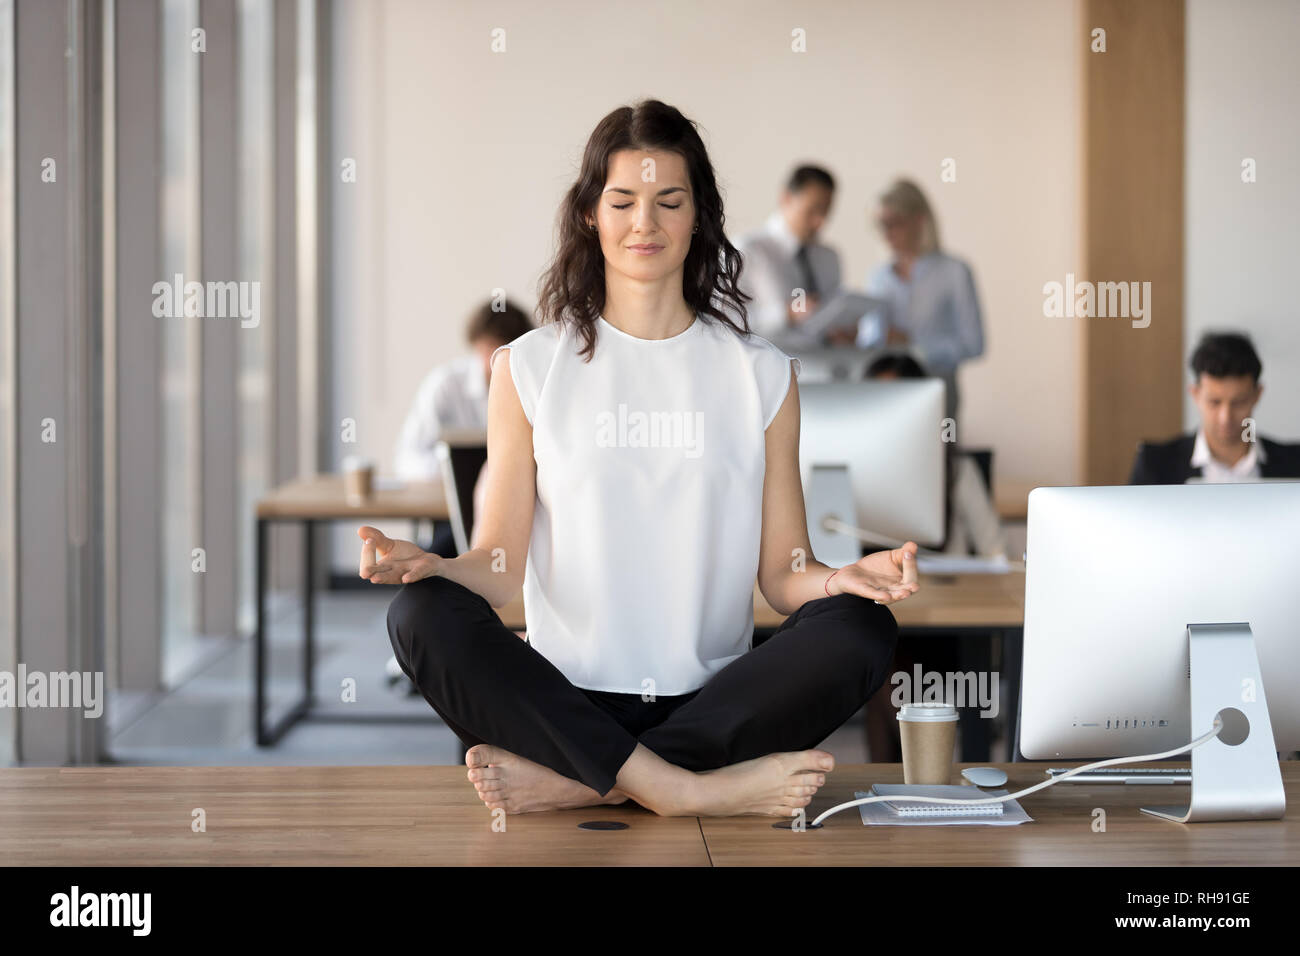 Calm Young Businesswoman Doing Yoga Exercise At Work Desk Stock